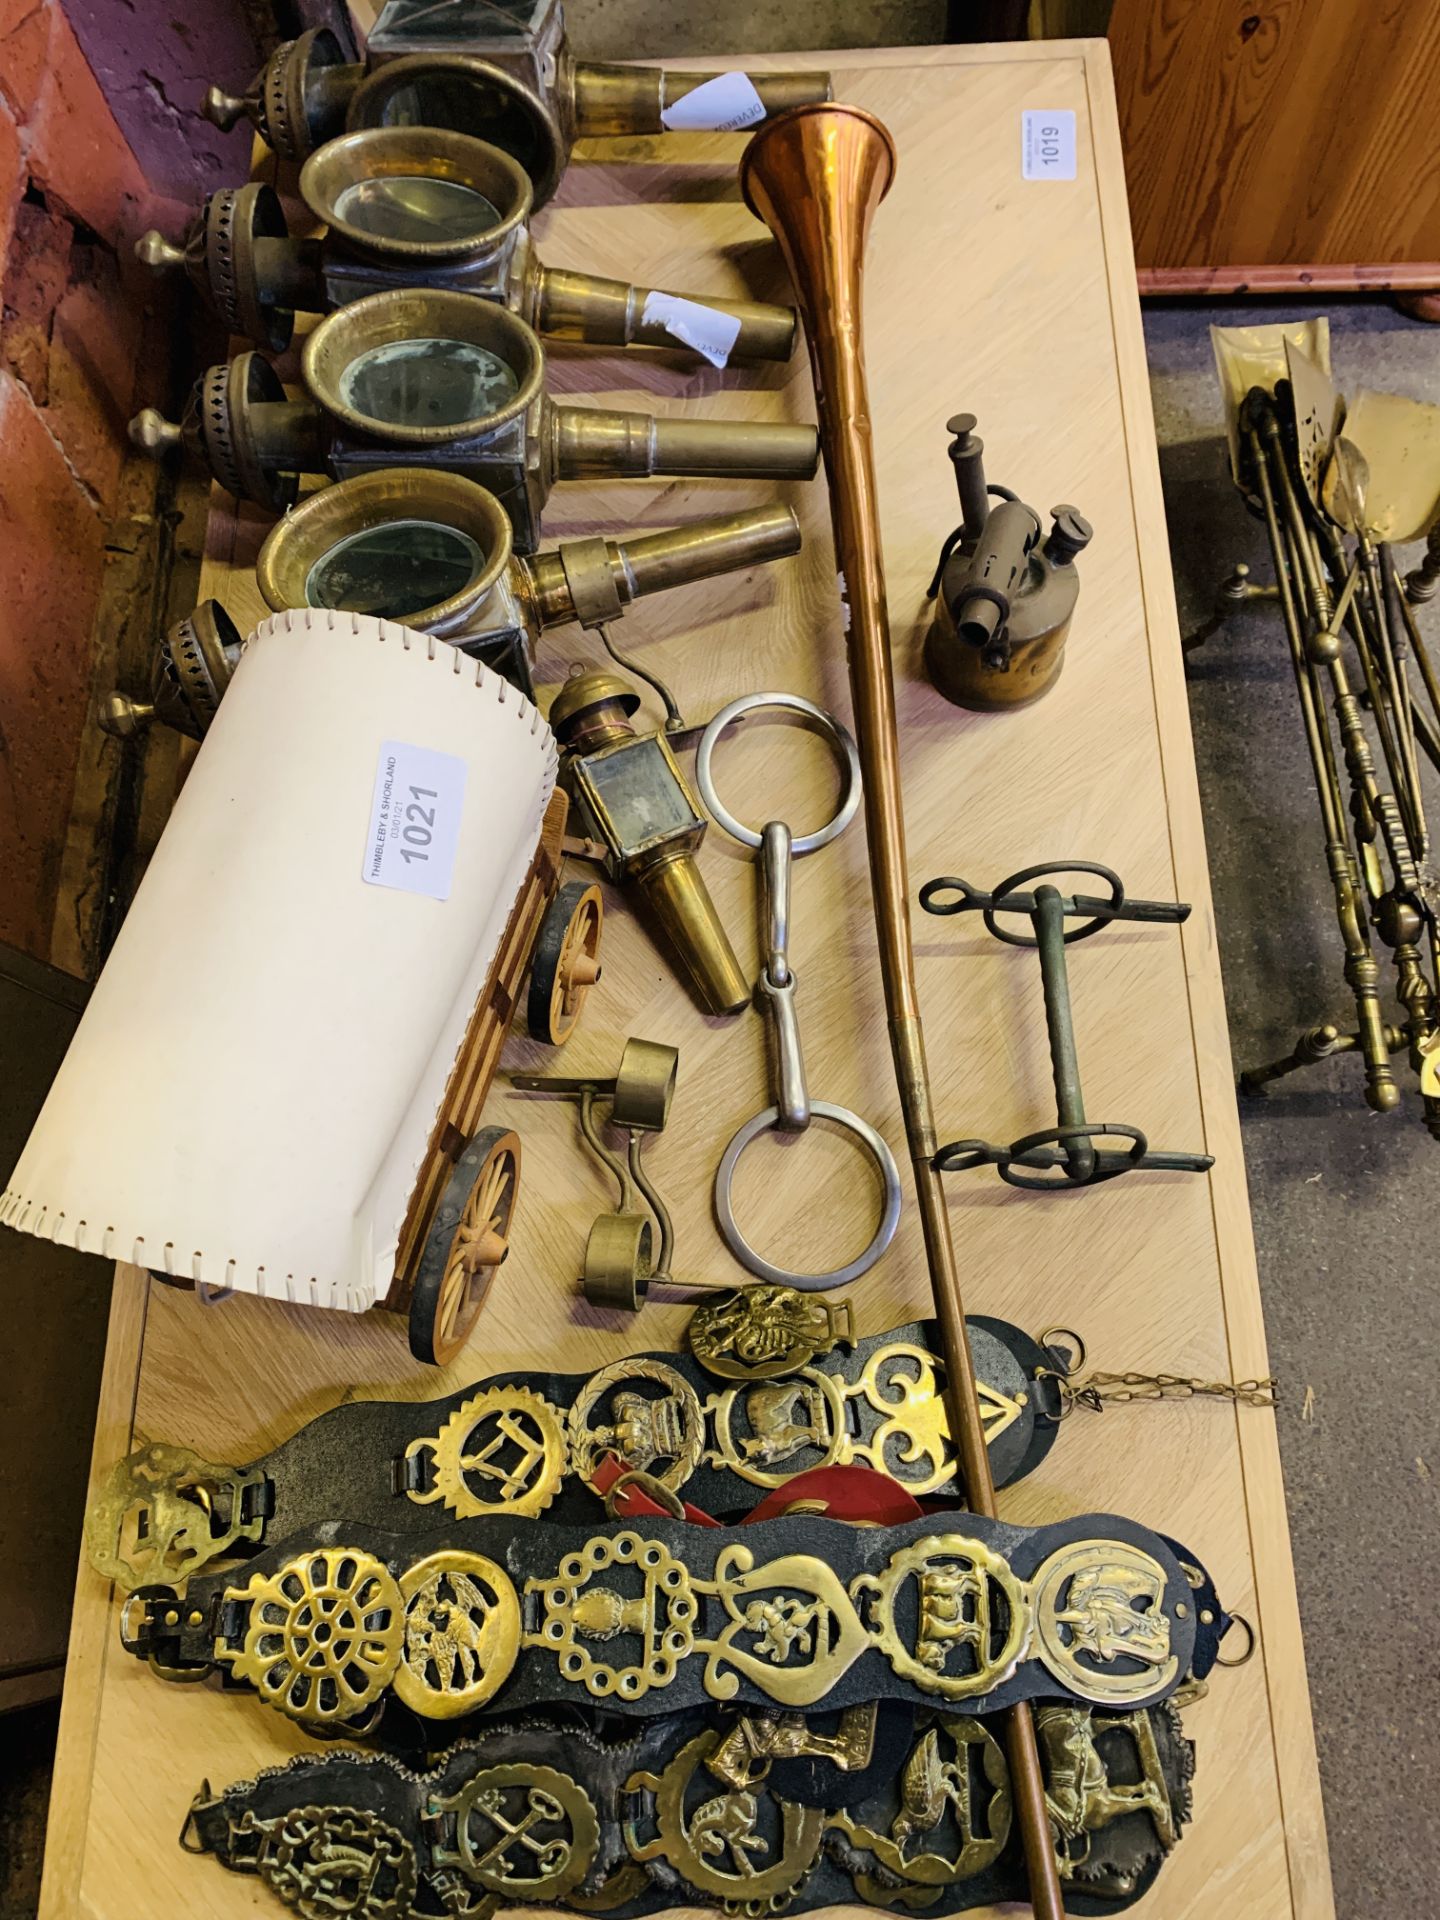 A quantity of mainly horse-related brass items and a blowlamp. - Image 2 of 3